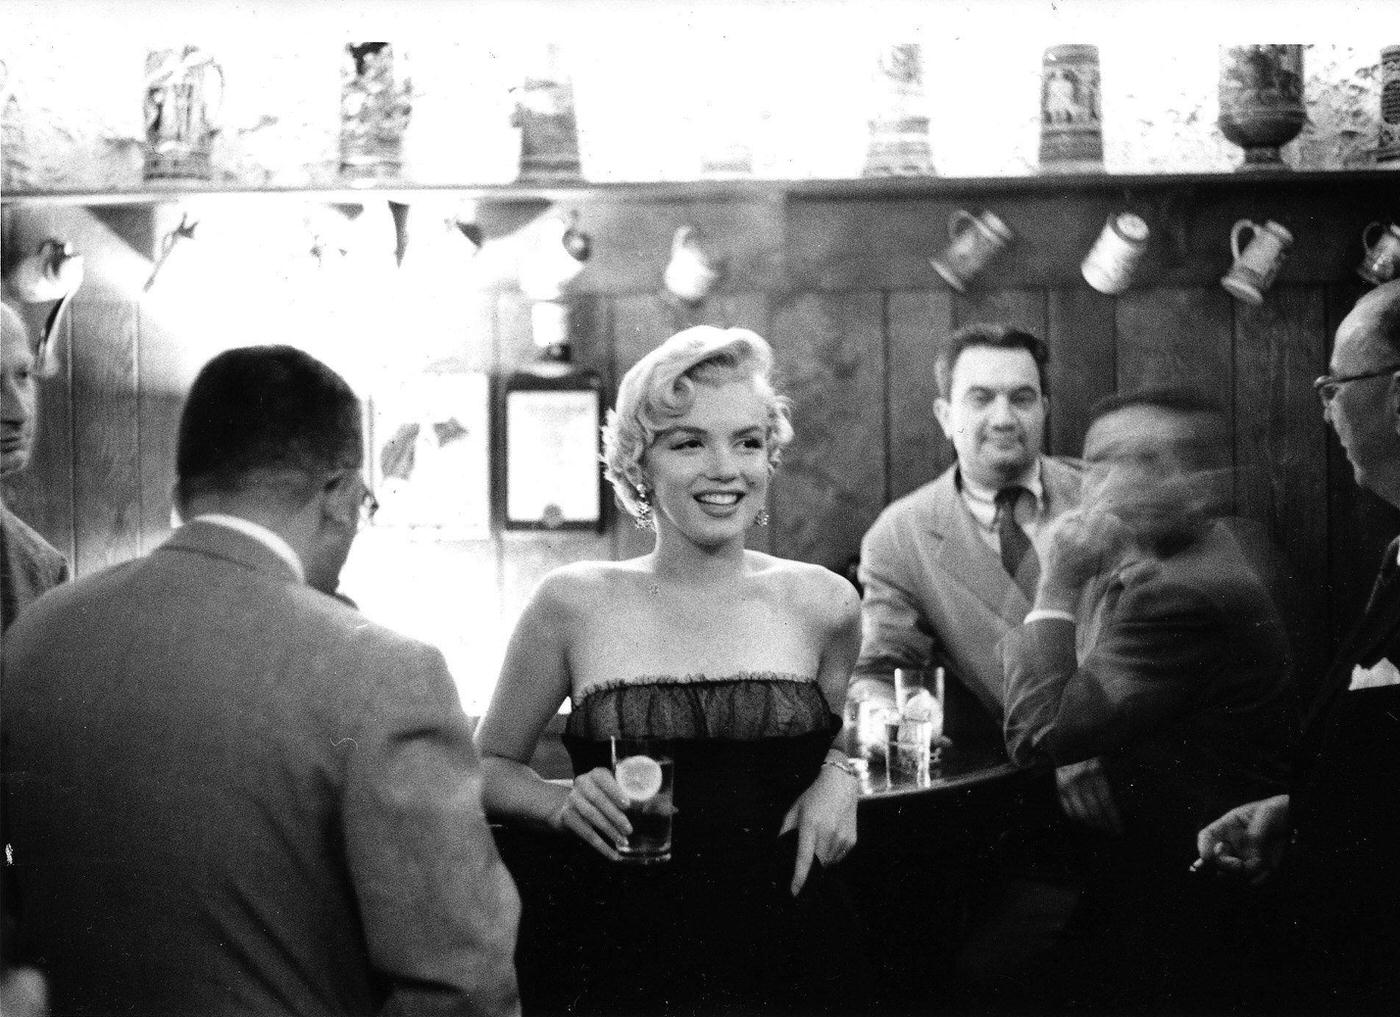 Marilyn Monroe at a press party for "The Seven Year Itch" at the '21' Club in 1954 in New York